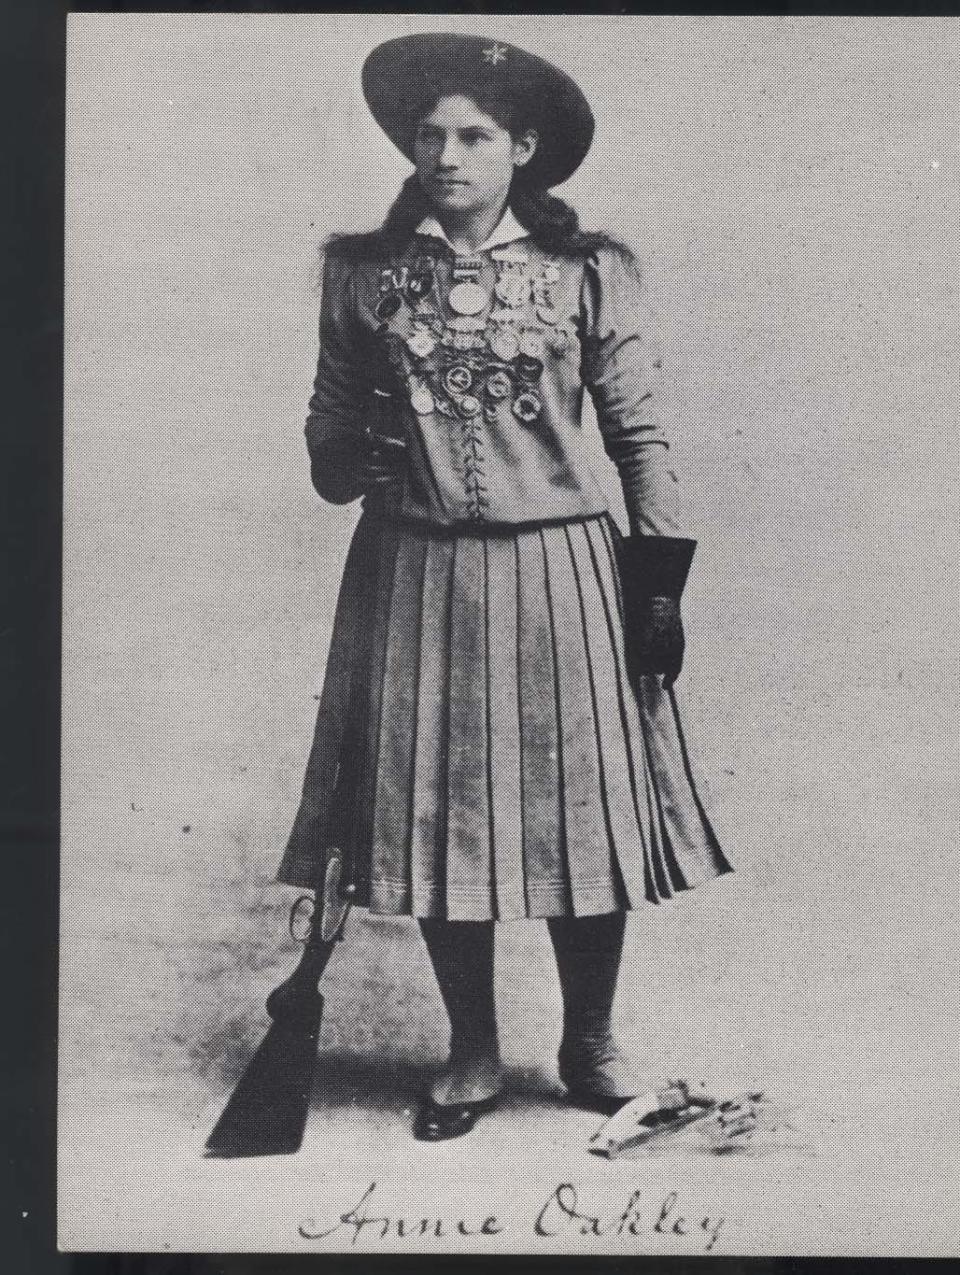 Born in Greenville, Ohio, "Little Sure Shot" sharpshooter Annie Oakley rose to international fame as a major star with Buffalo Bill's Wild West Show.